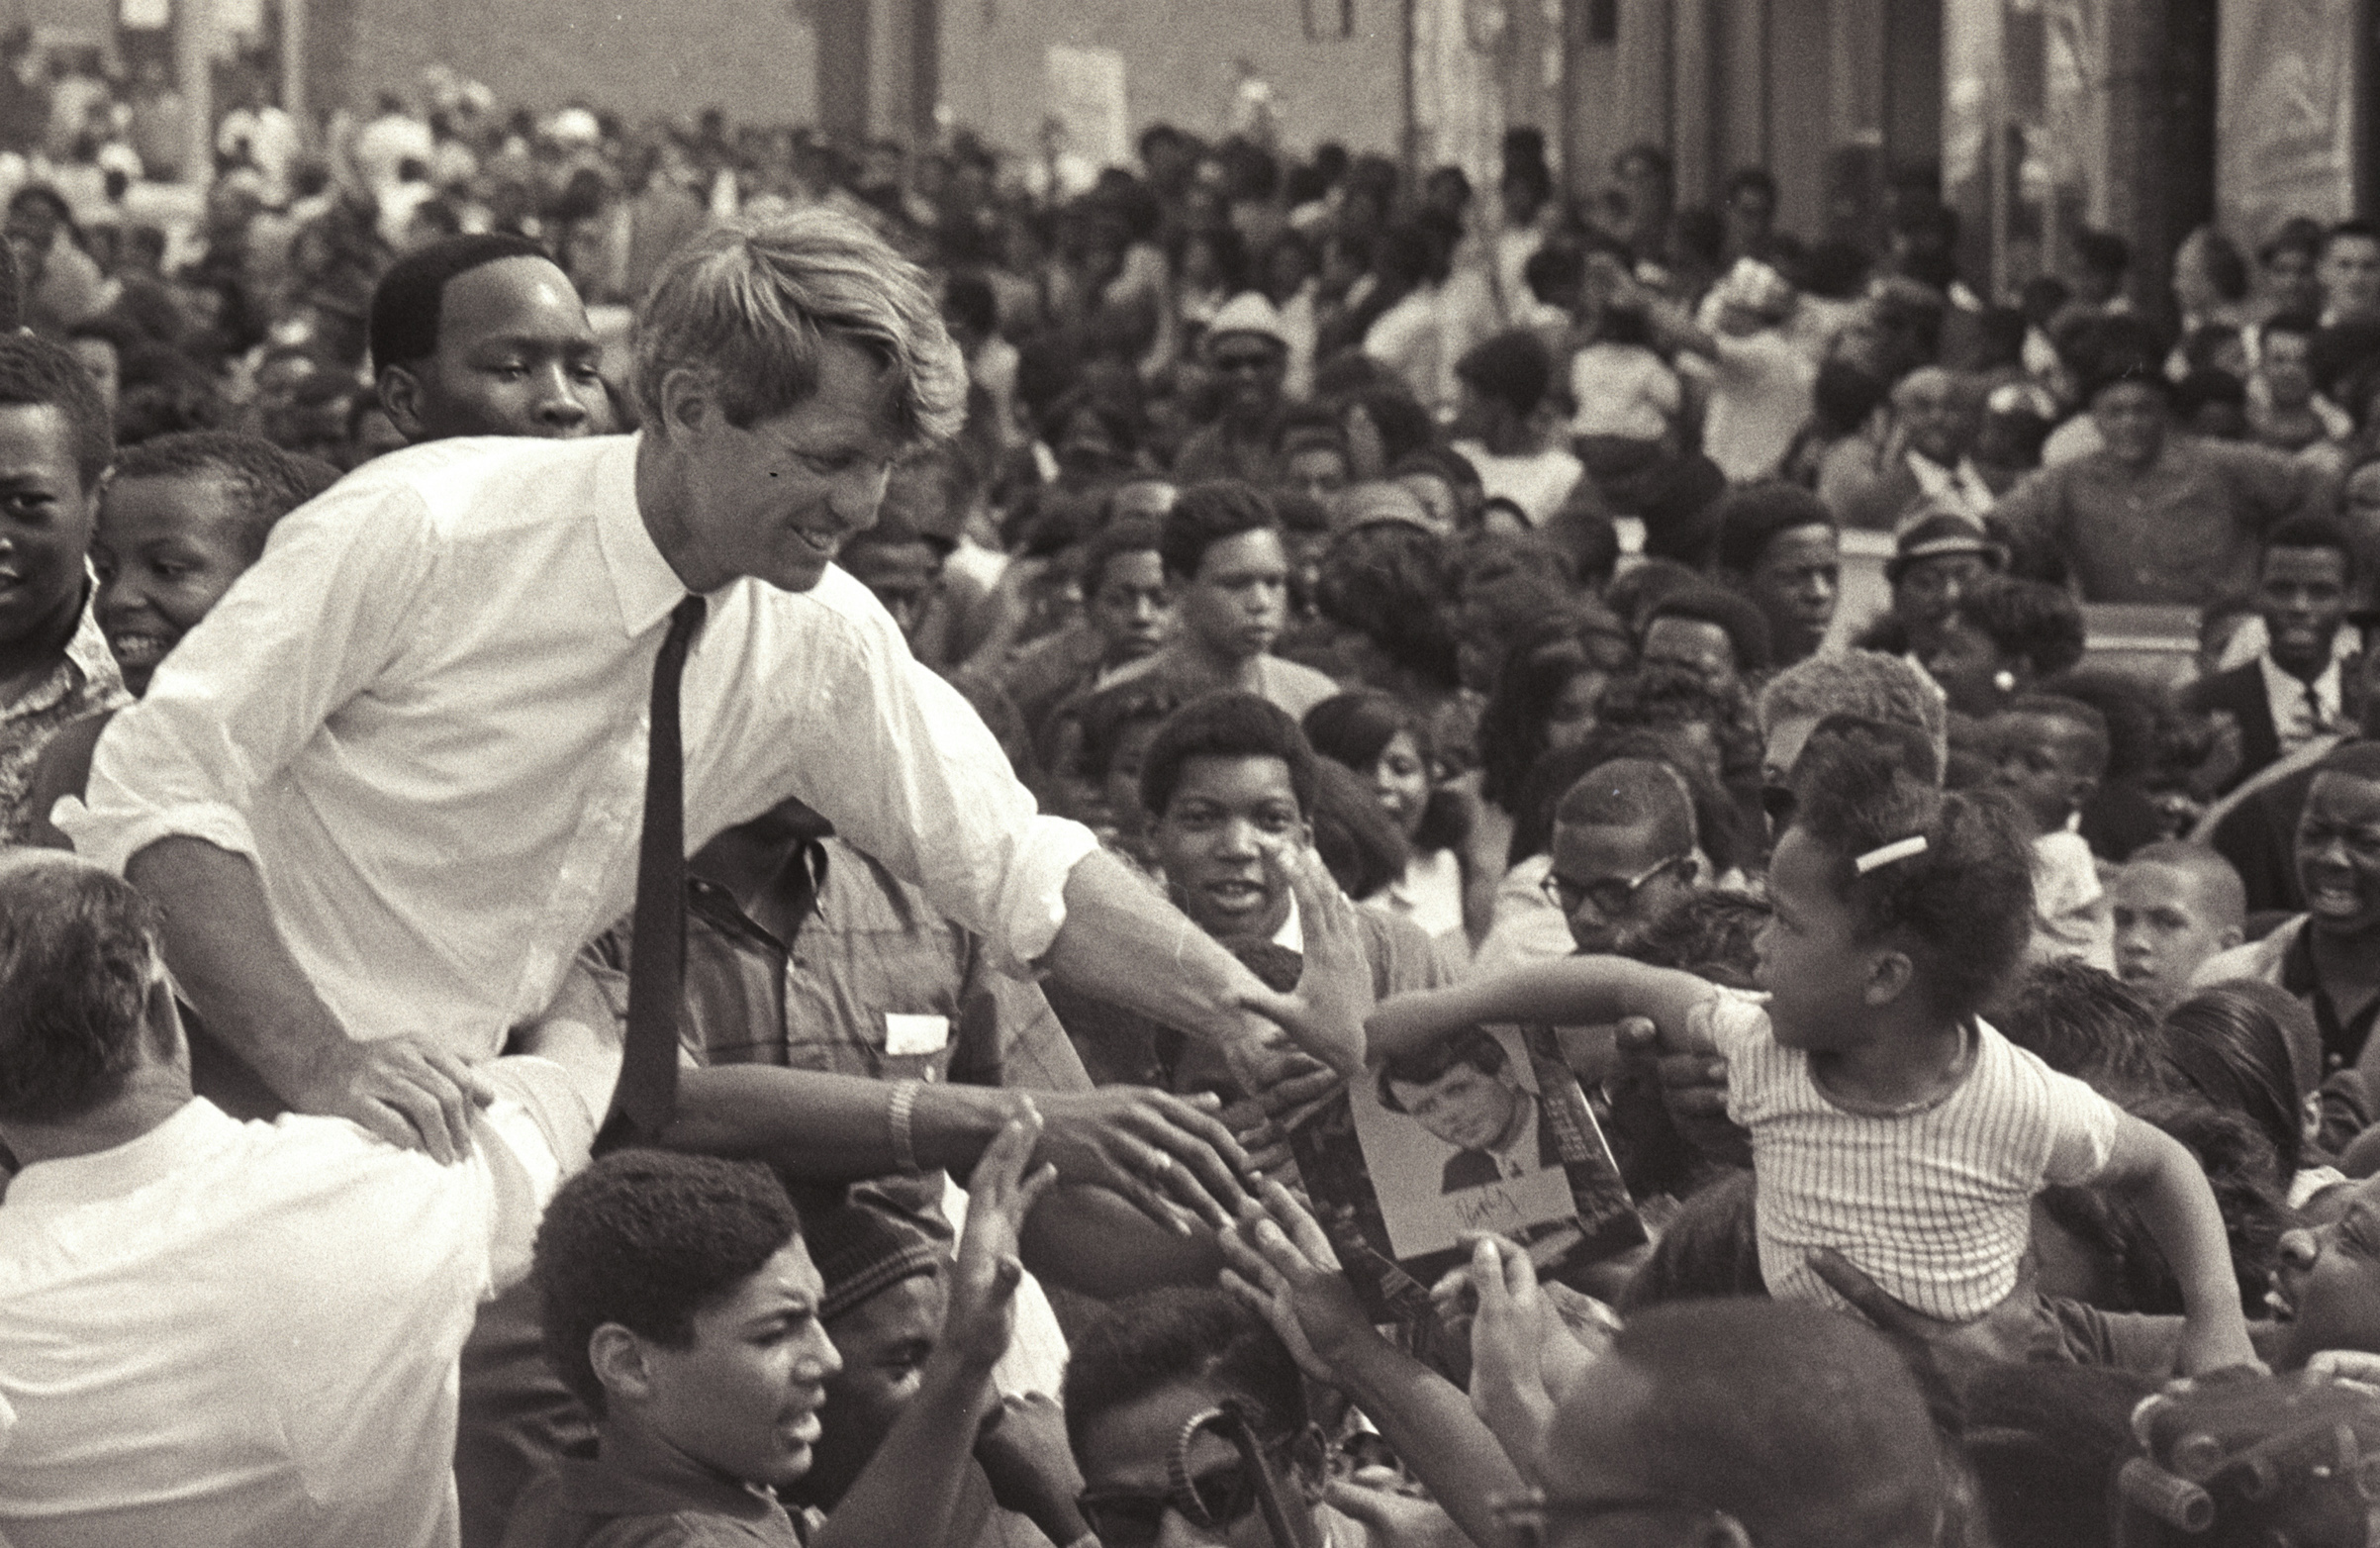 Robert F. Kennedy campaigns in Detroit, May 1968. (Andrew Sacks—Getty Images)